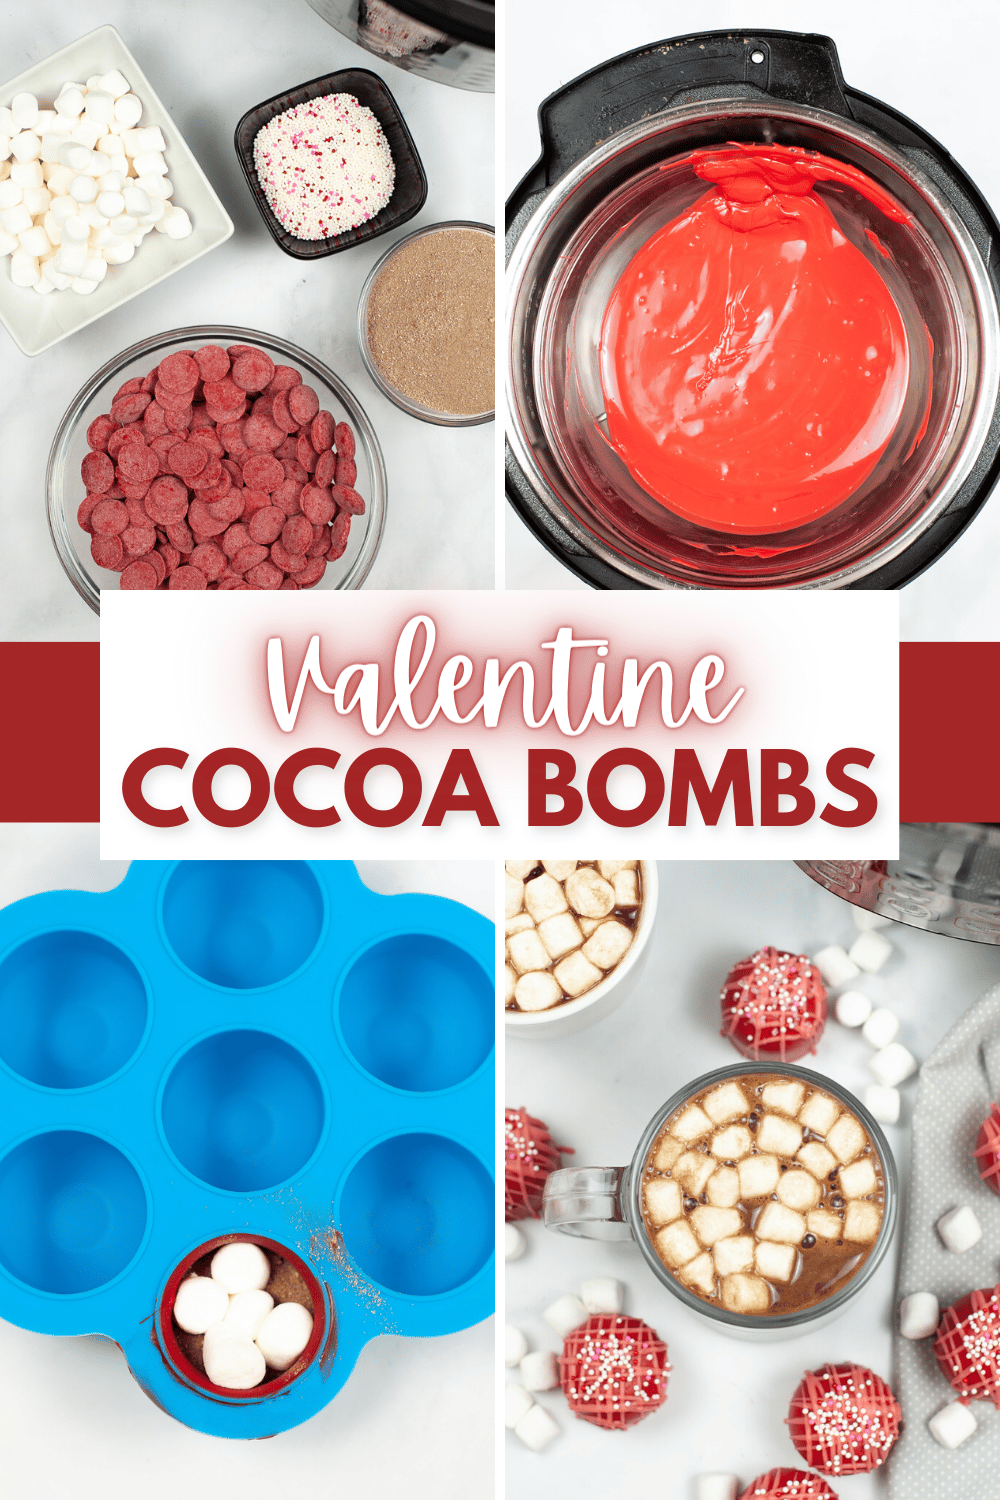 These Valentine Cocoa Bombs make a steaming mug of creamy hot cocoa that is rich, decadent, and full of flavor. They also make a great gift. #valentinecocoabombs #hotcocoabombs #hotcocoa #hotchocolate #valentinesday via @wondermomwannab